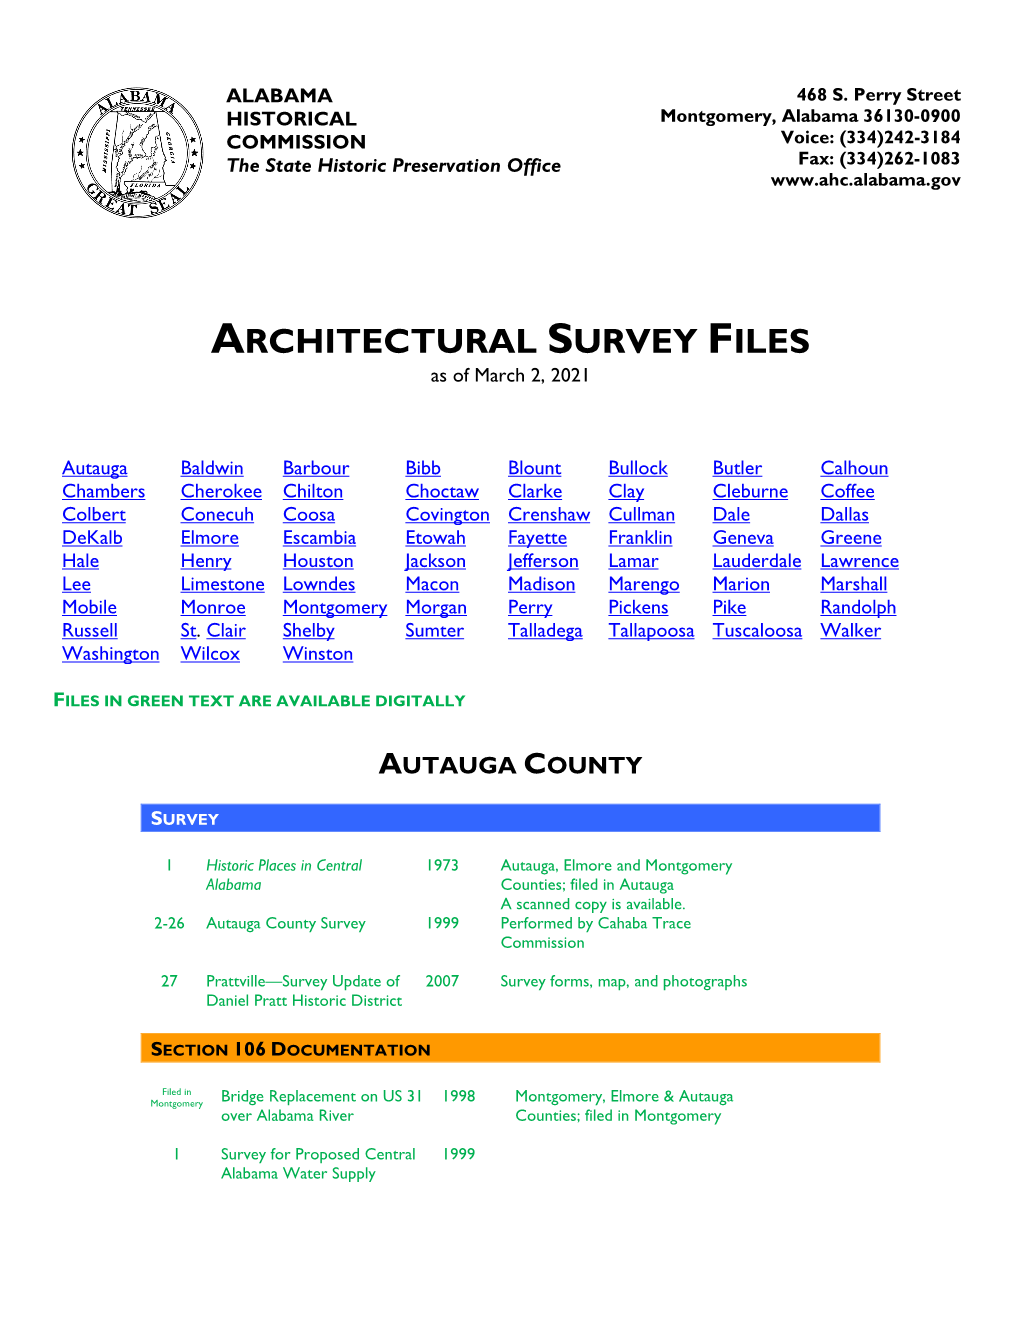 List of Architectural Survey Files